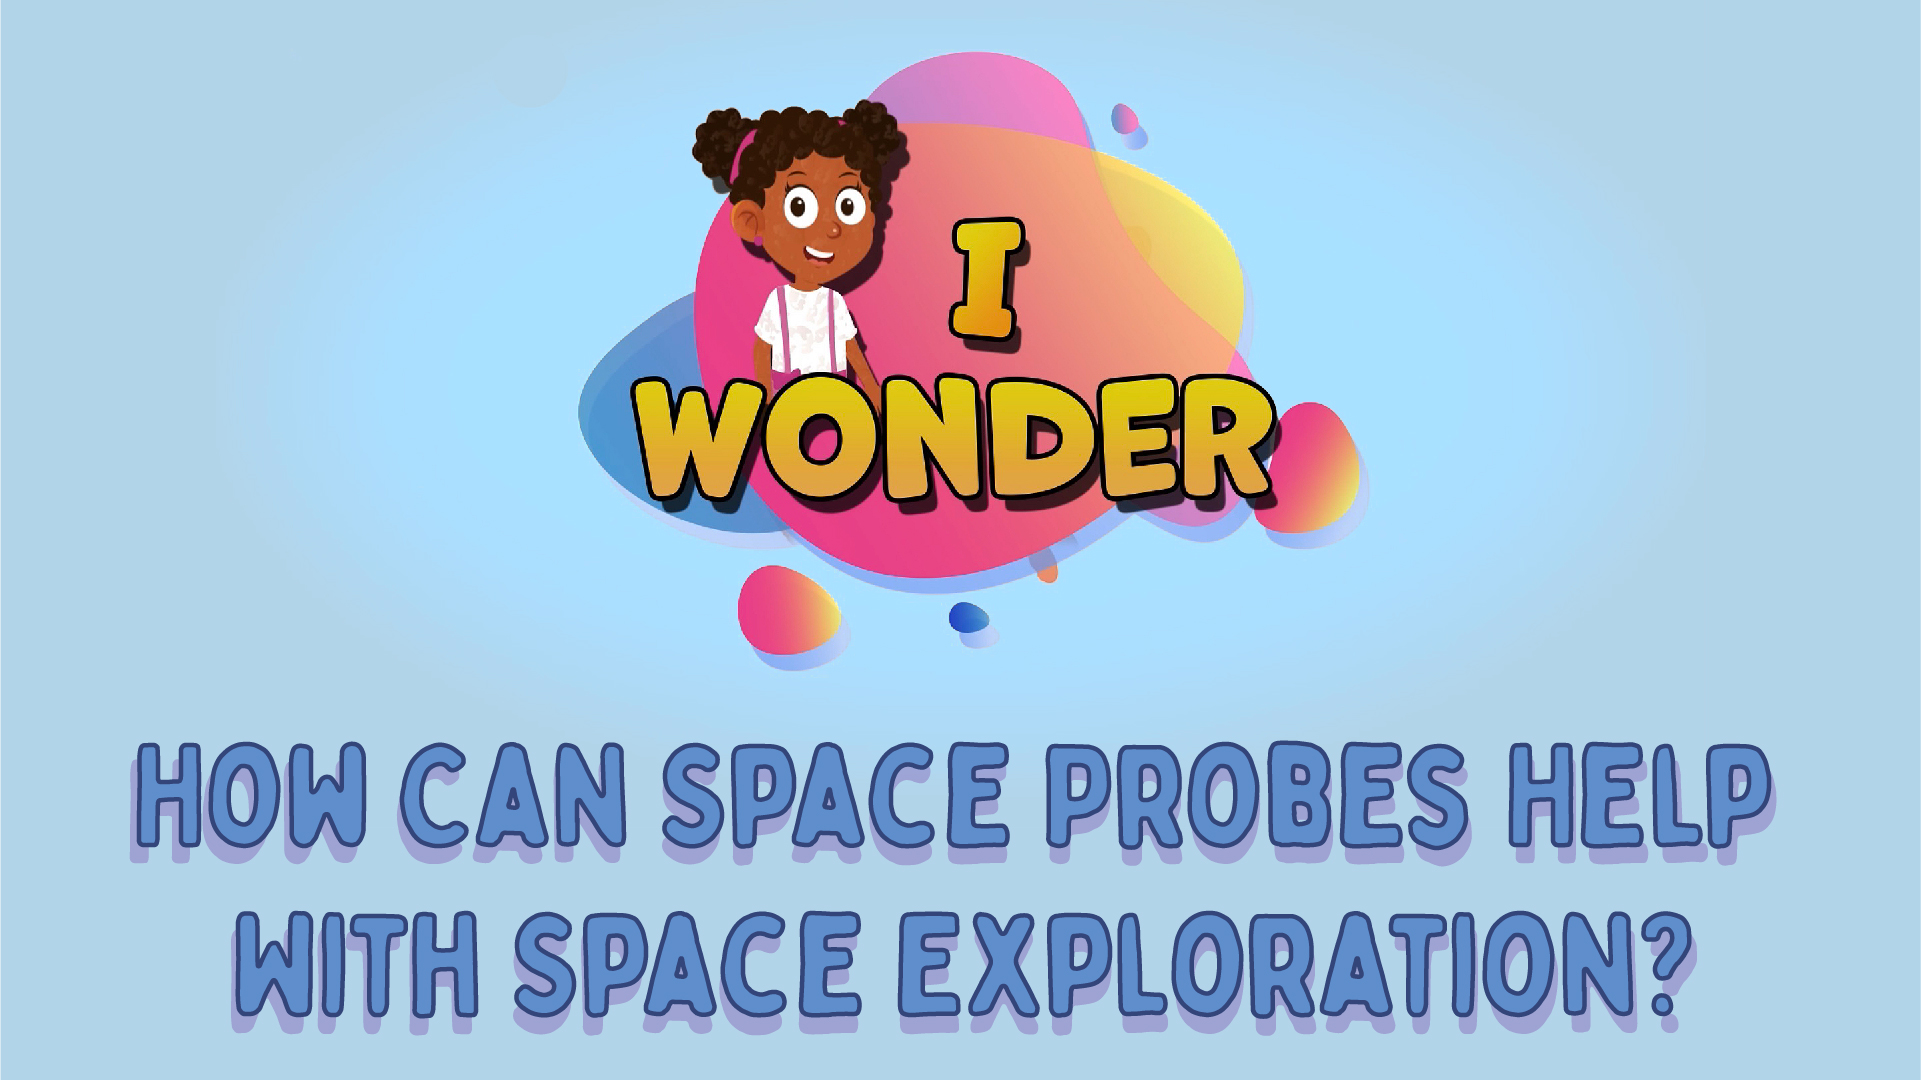 How Can Space Probes Help With Space Exploration?